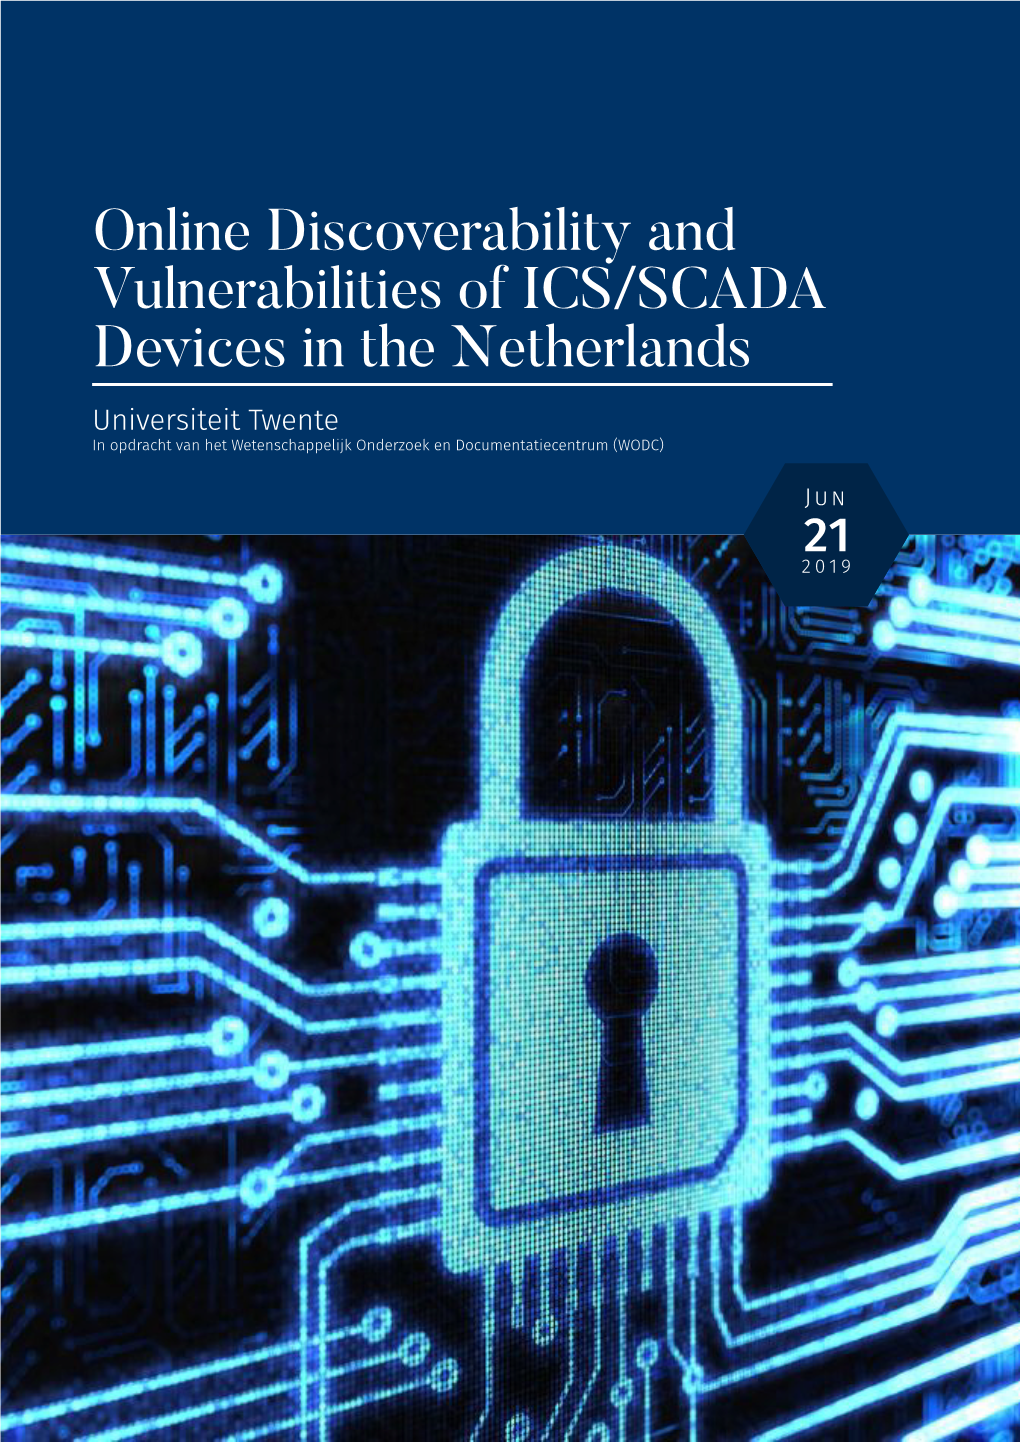 Online Discoverability and Vulnerabilities of ICS/SCADA Systems in the Netherlands